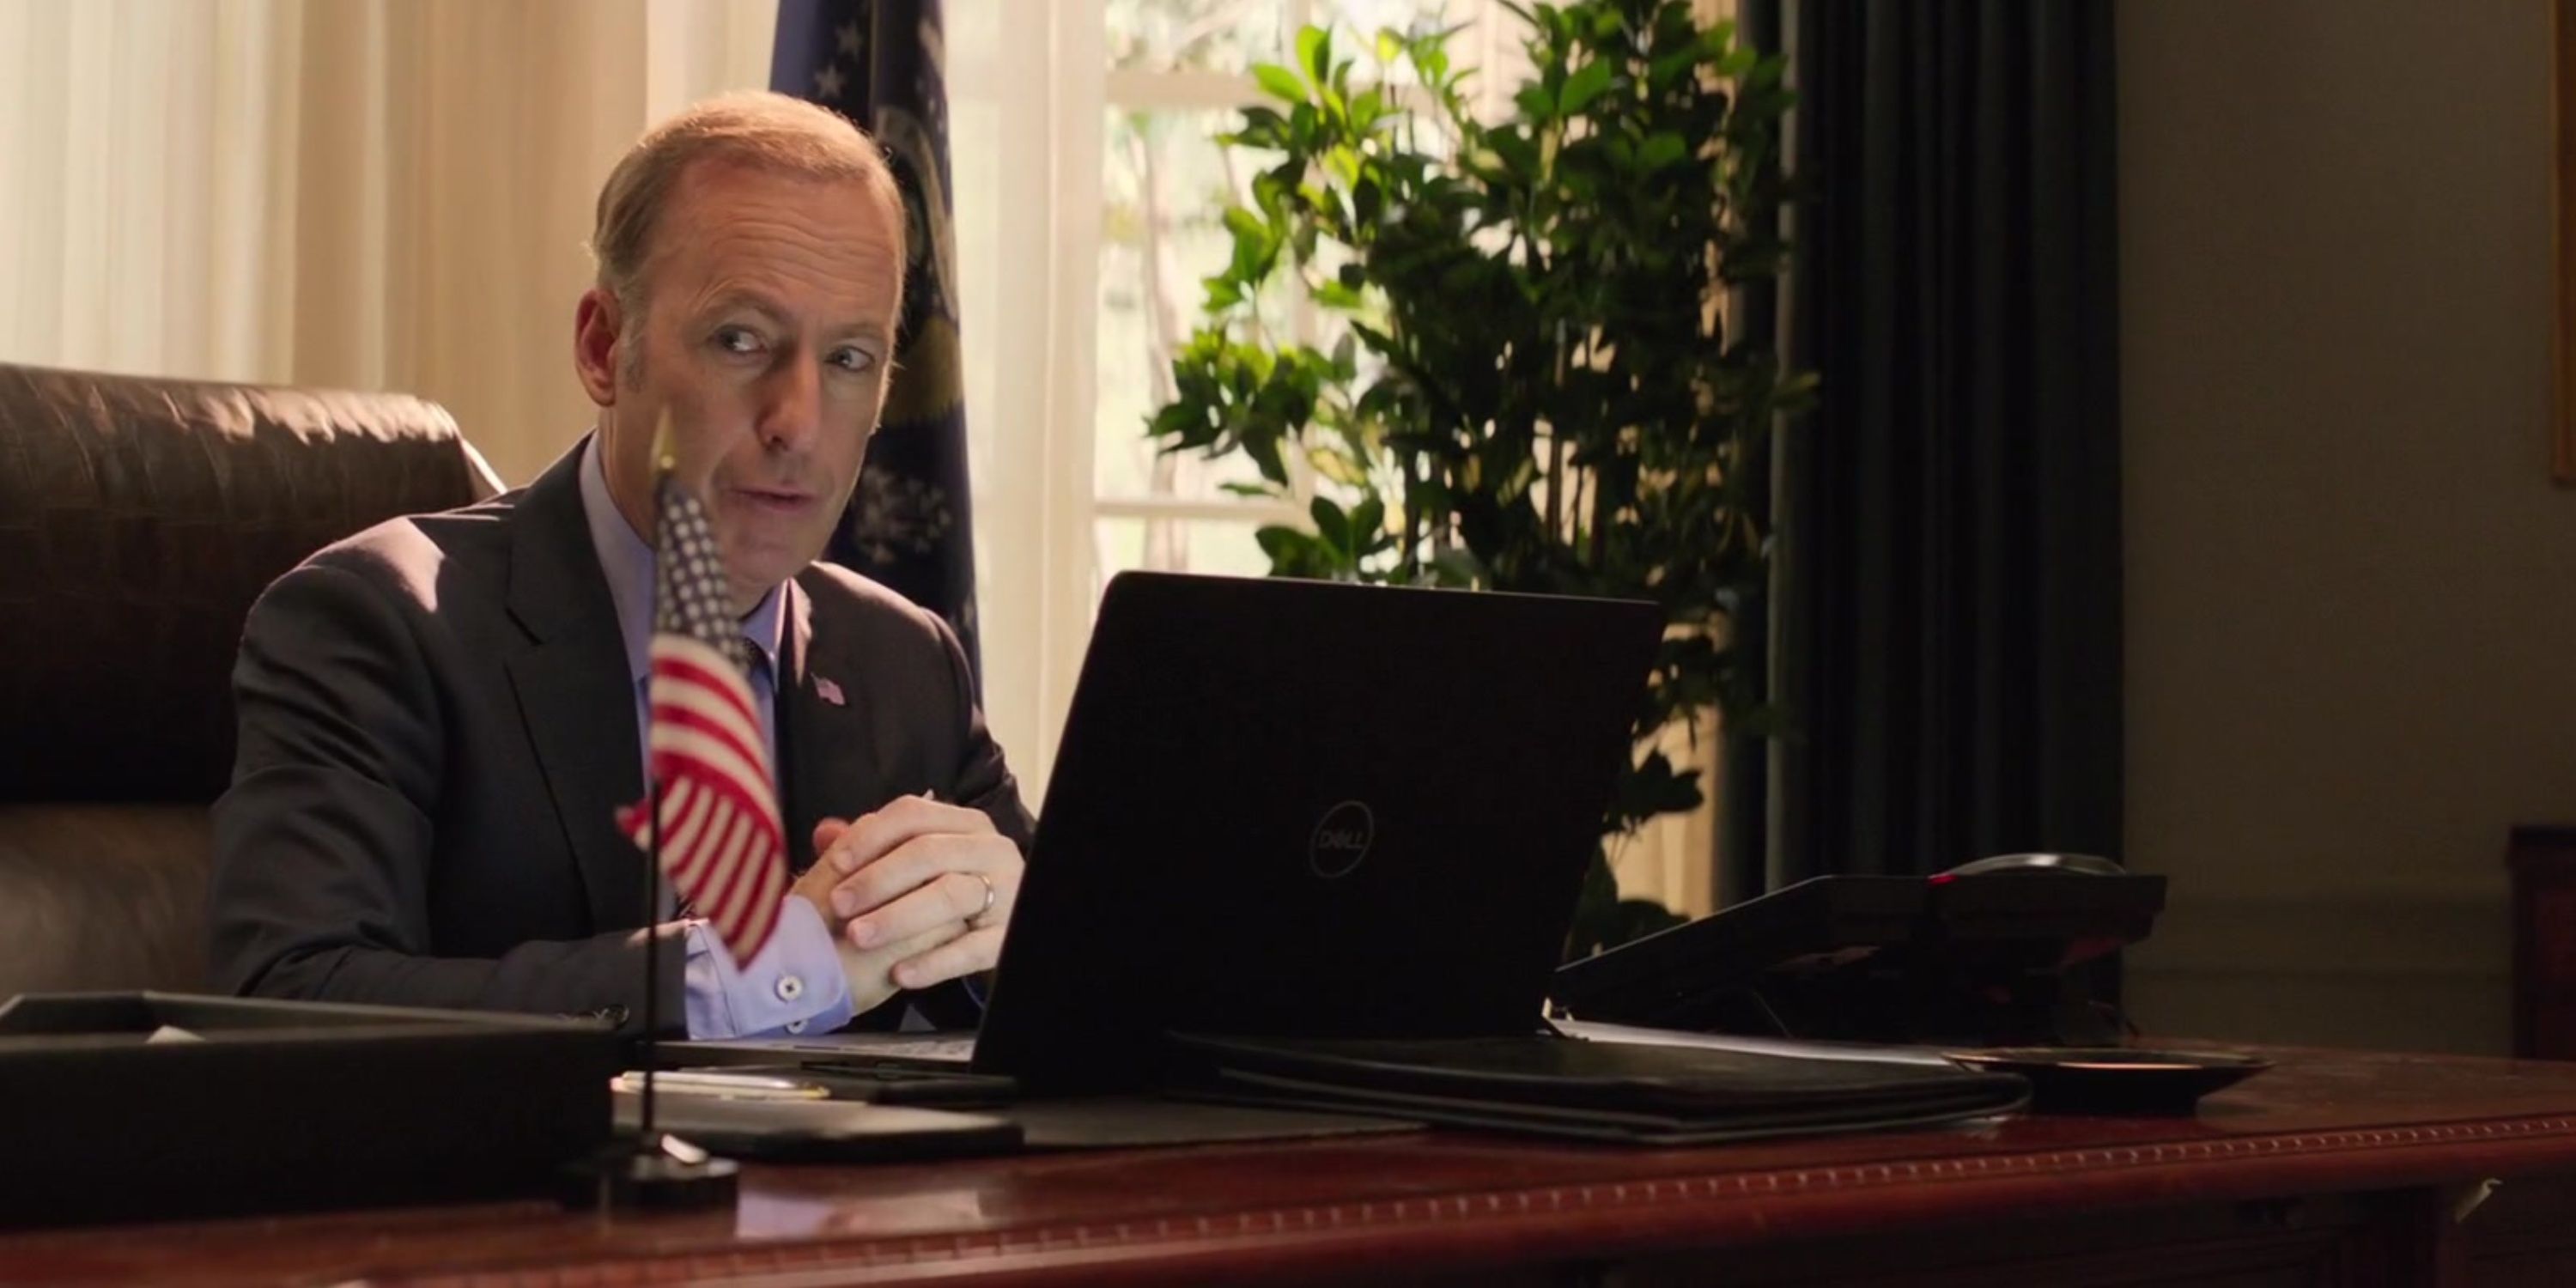 Bob Odenkirk as President Chambers in The Long Shot